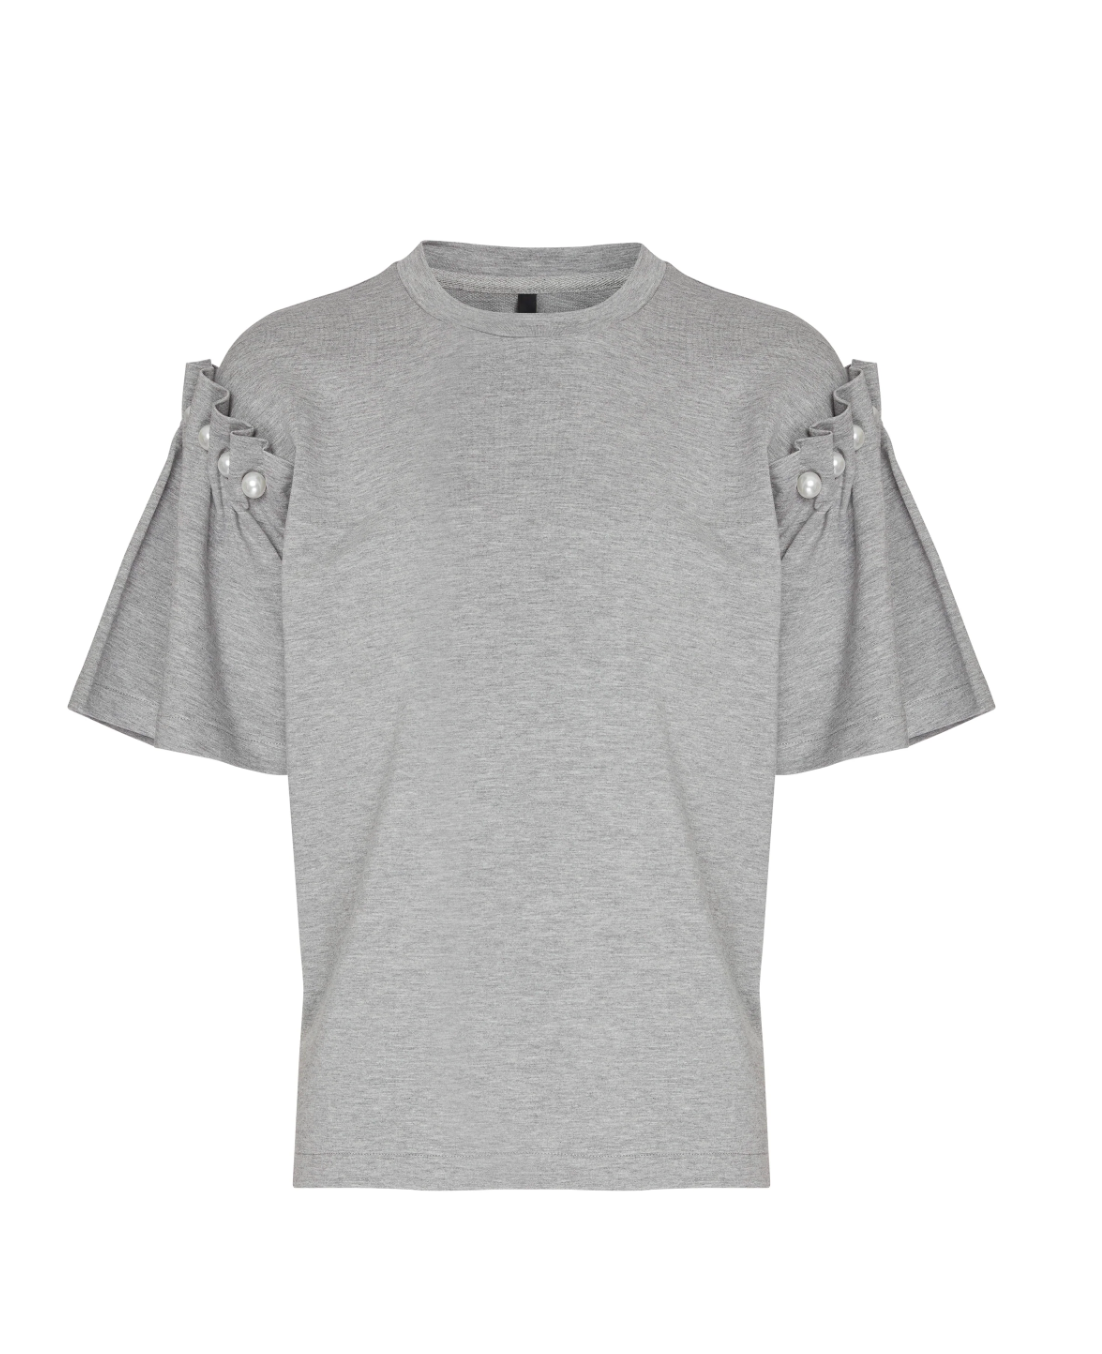 Mother of Pearl - Amber Pearl Grey Marl T-Shirt - Image 5